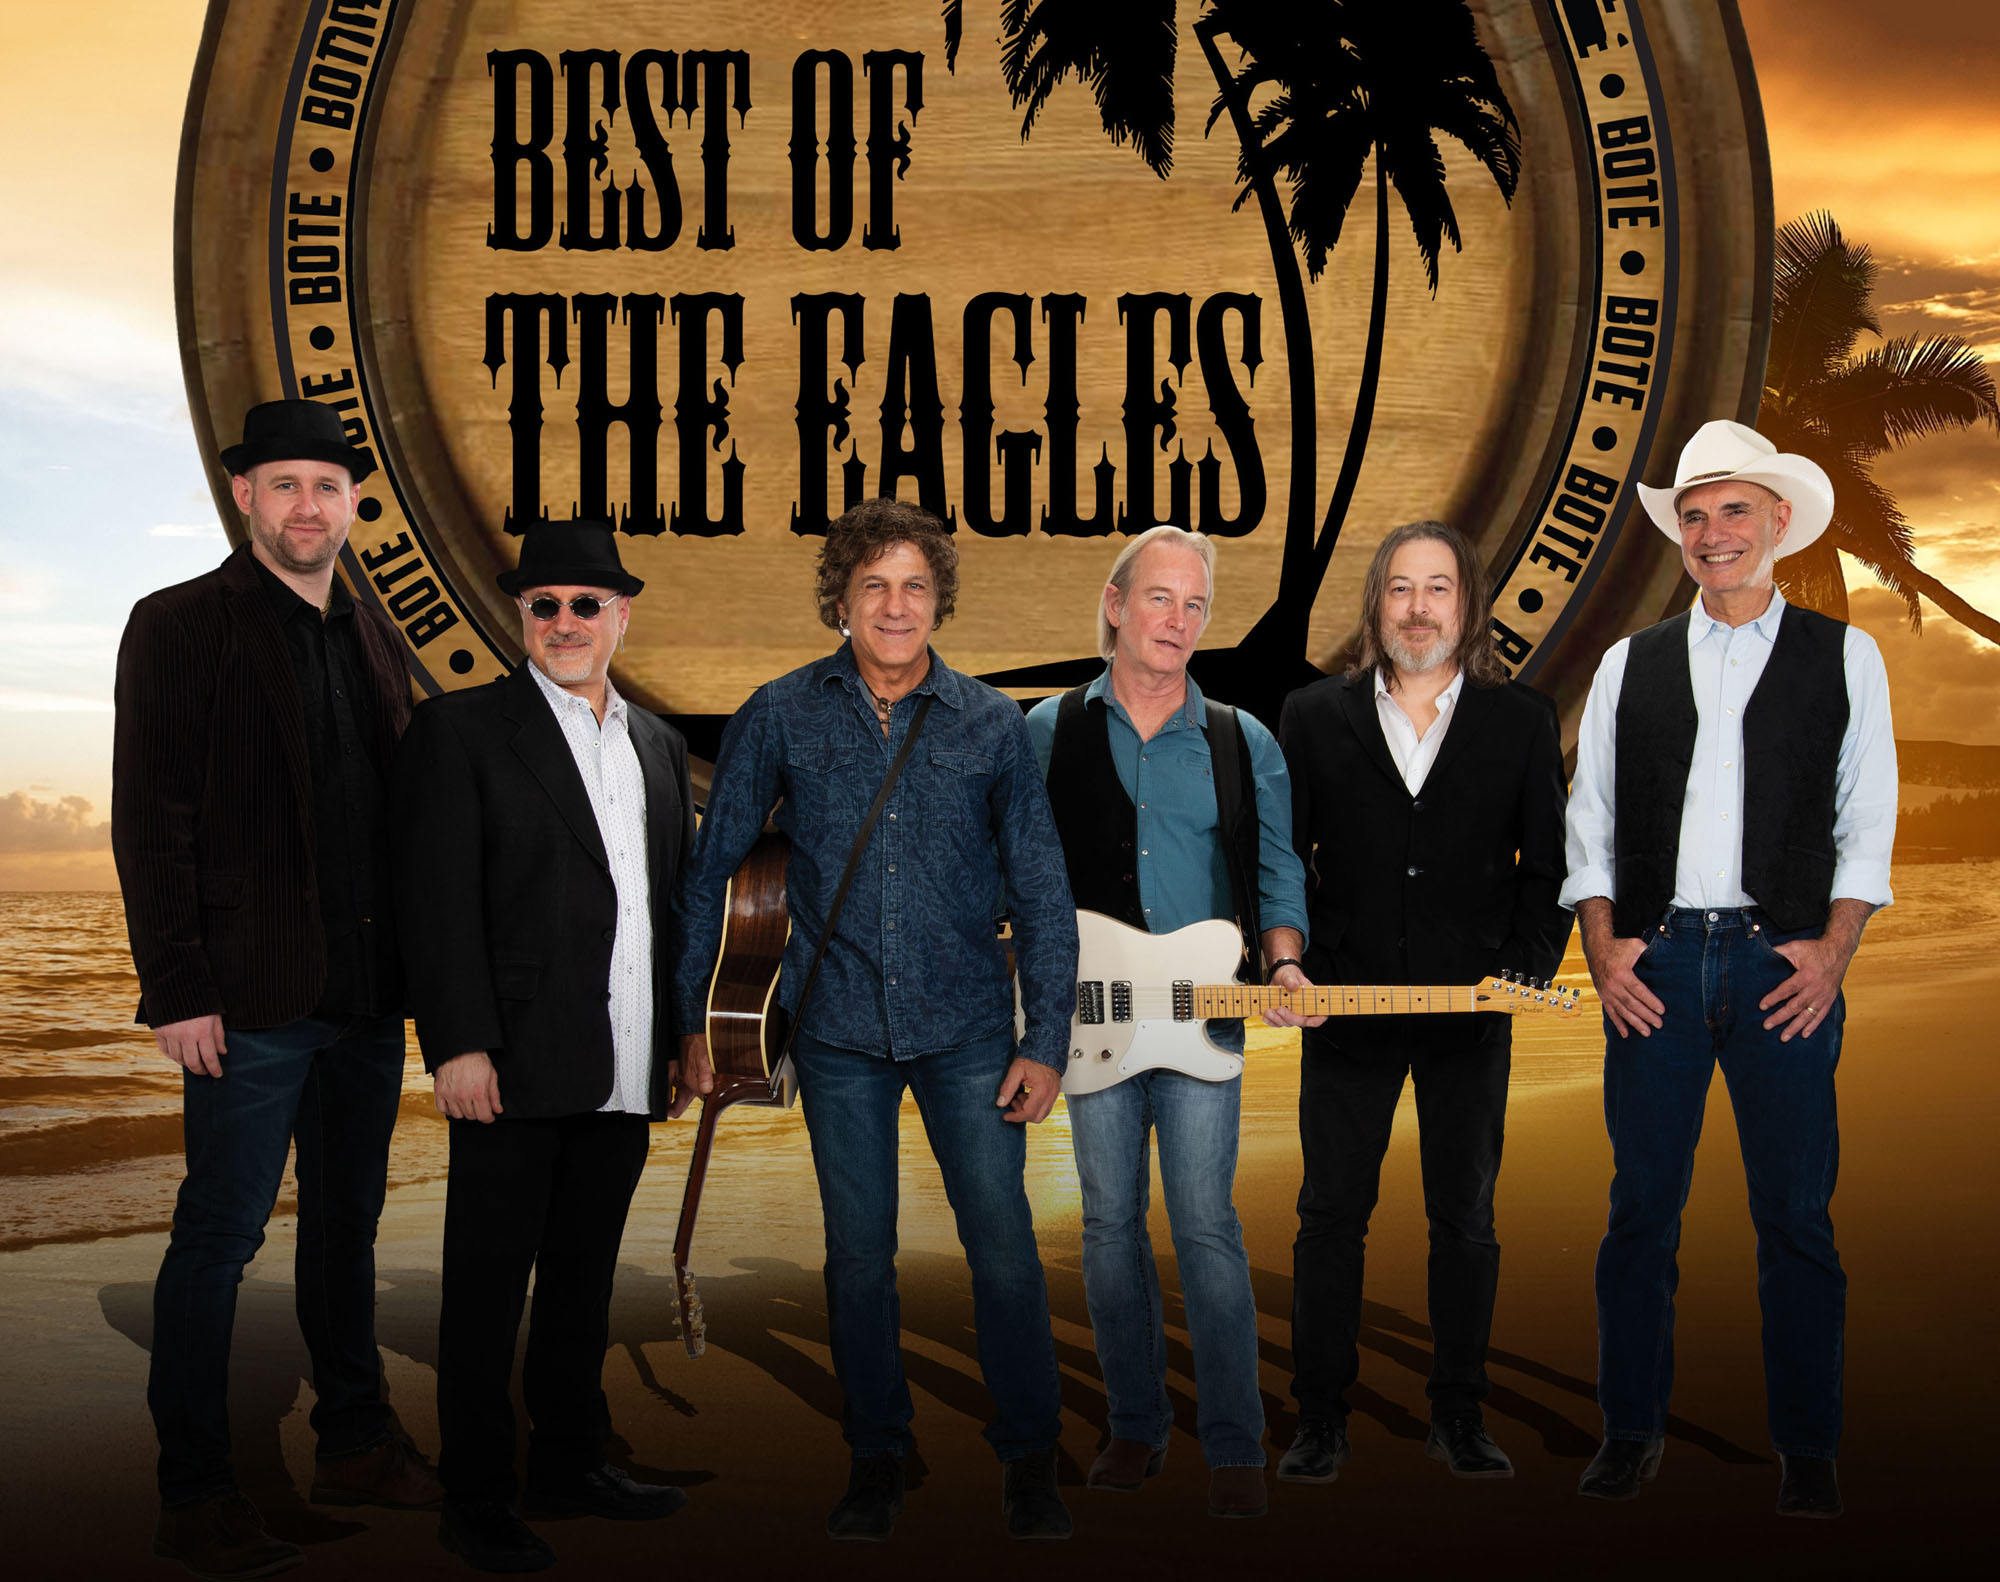 Tribute band 'Best of the Eagles' performs at Scranton Cultural Center